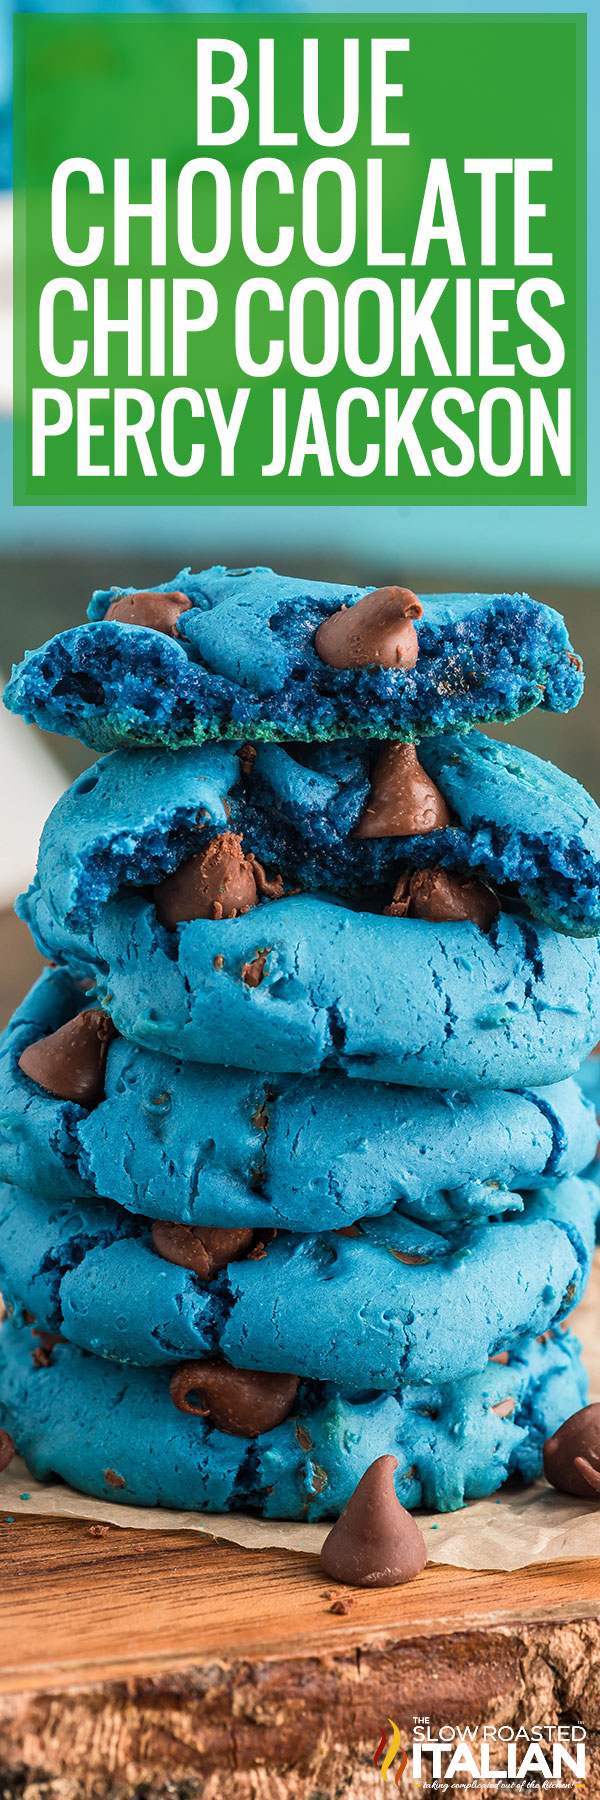 Blue Chocolate Chip Cookies Percy Jackson - PIN